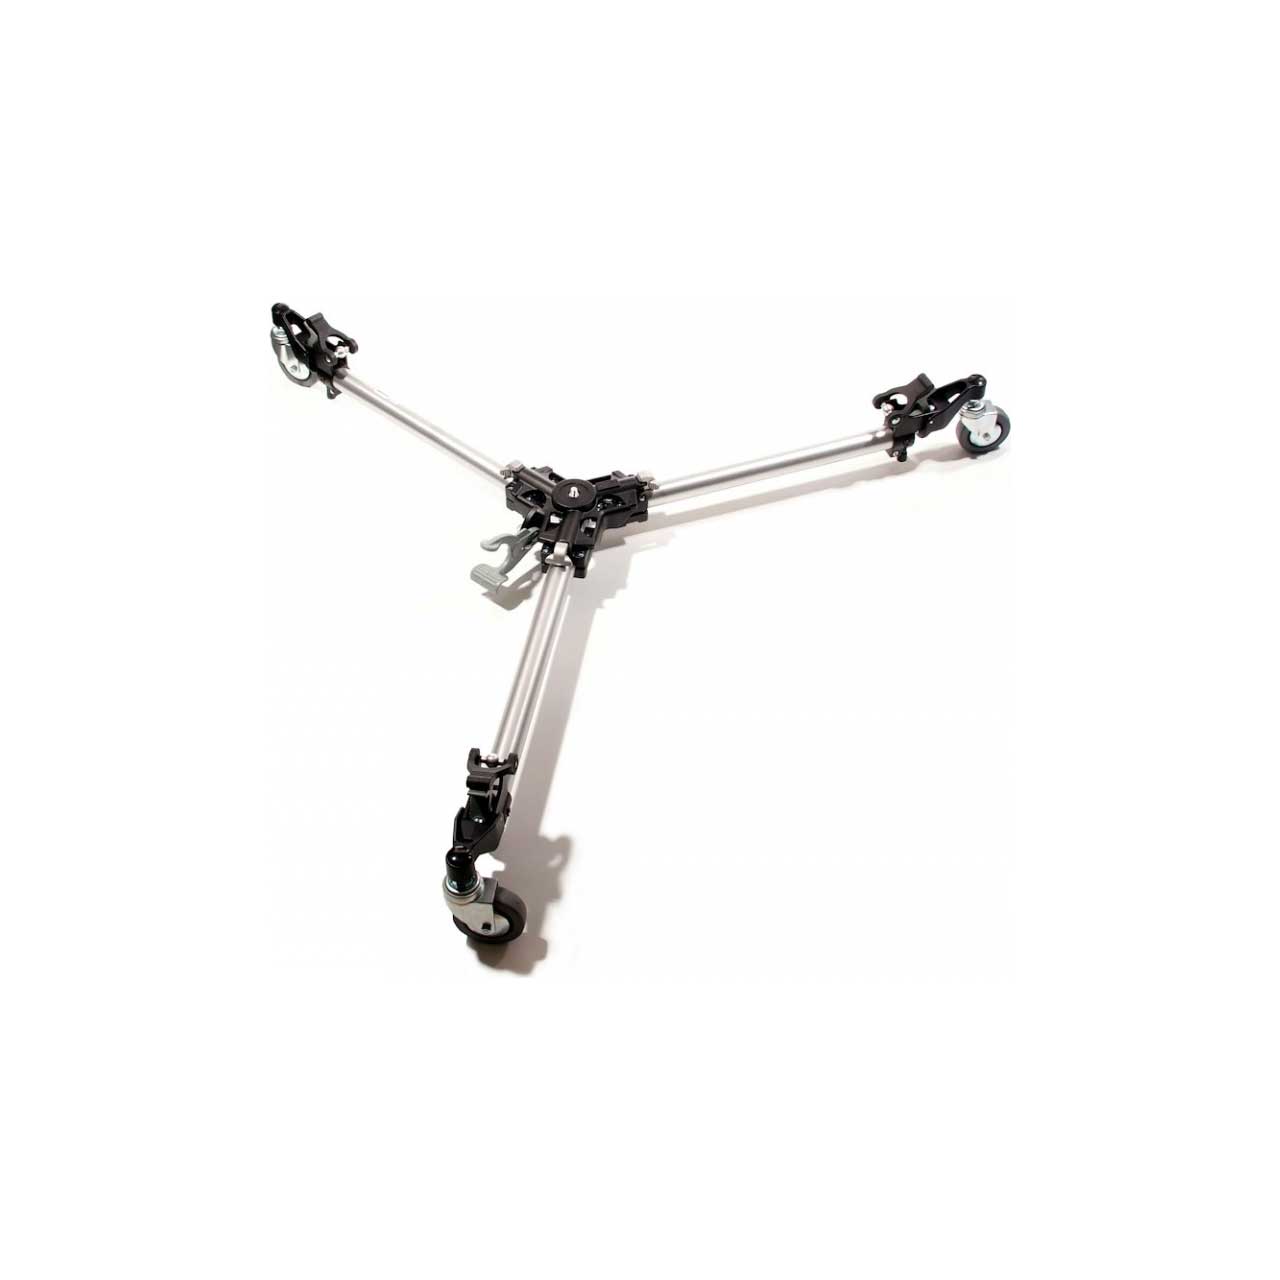 Manfrotto 181 Folding Auto Dolly for Twin Spiked Metal Feet Tripods - Silver